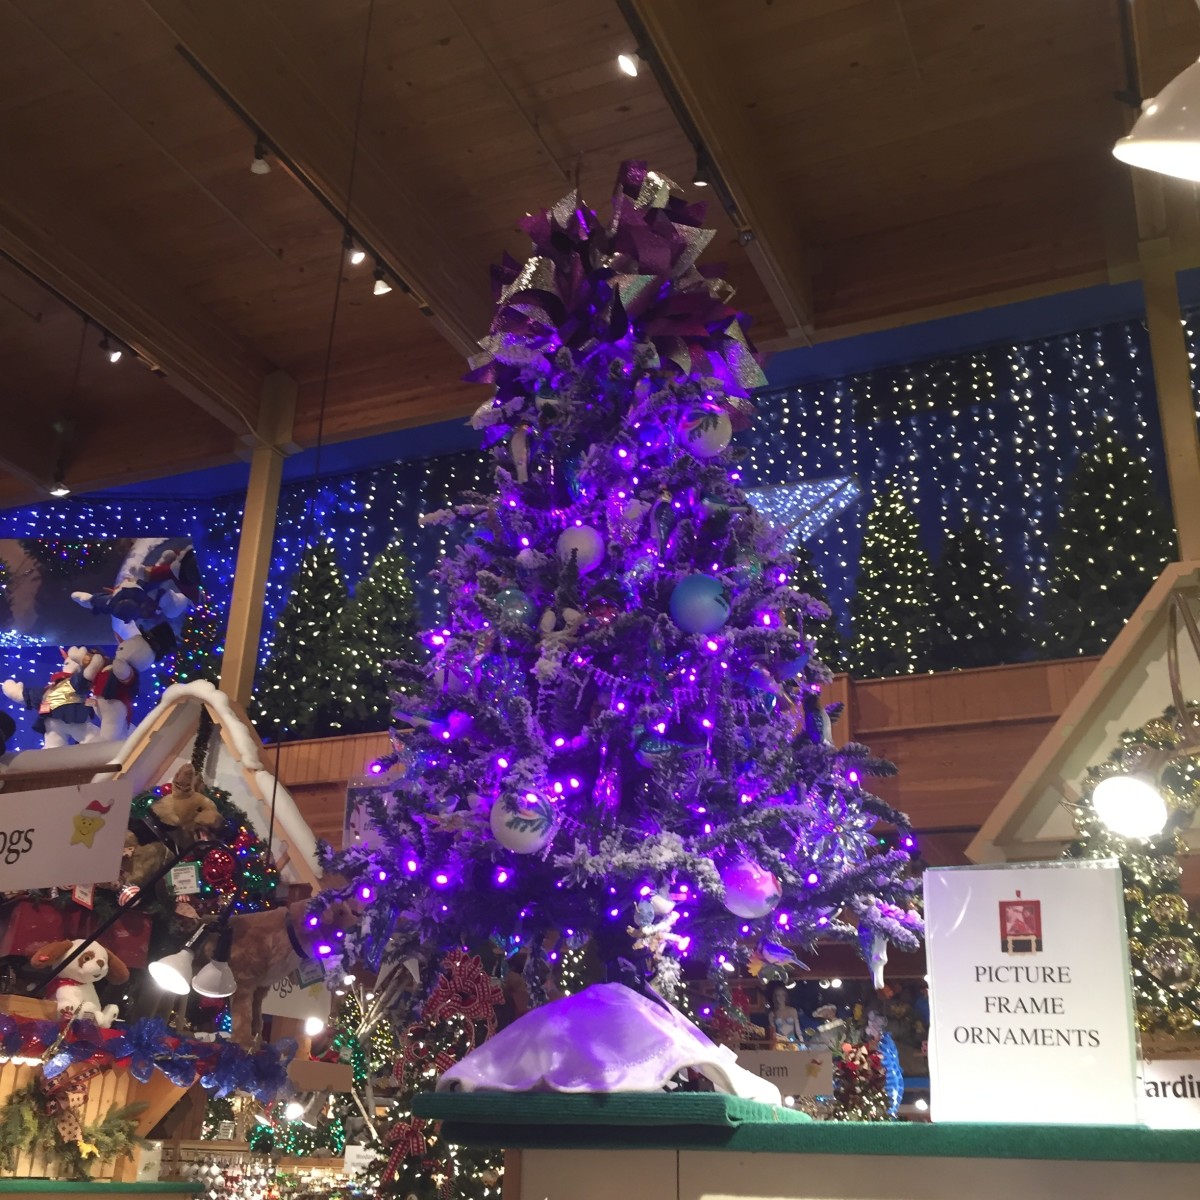 Do you fancy your Christmas tree in purple?